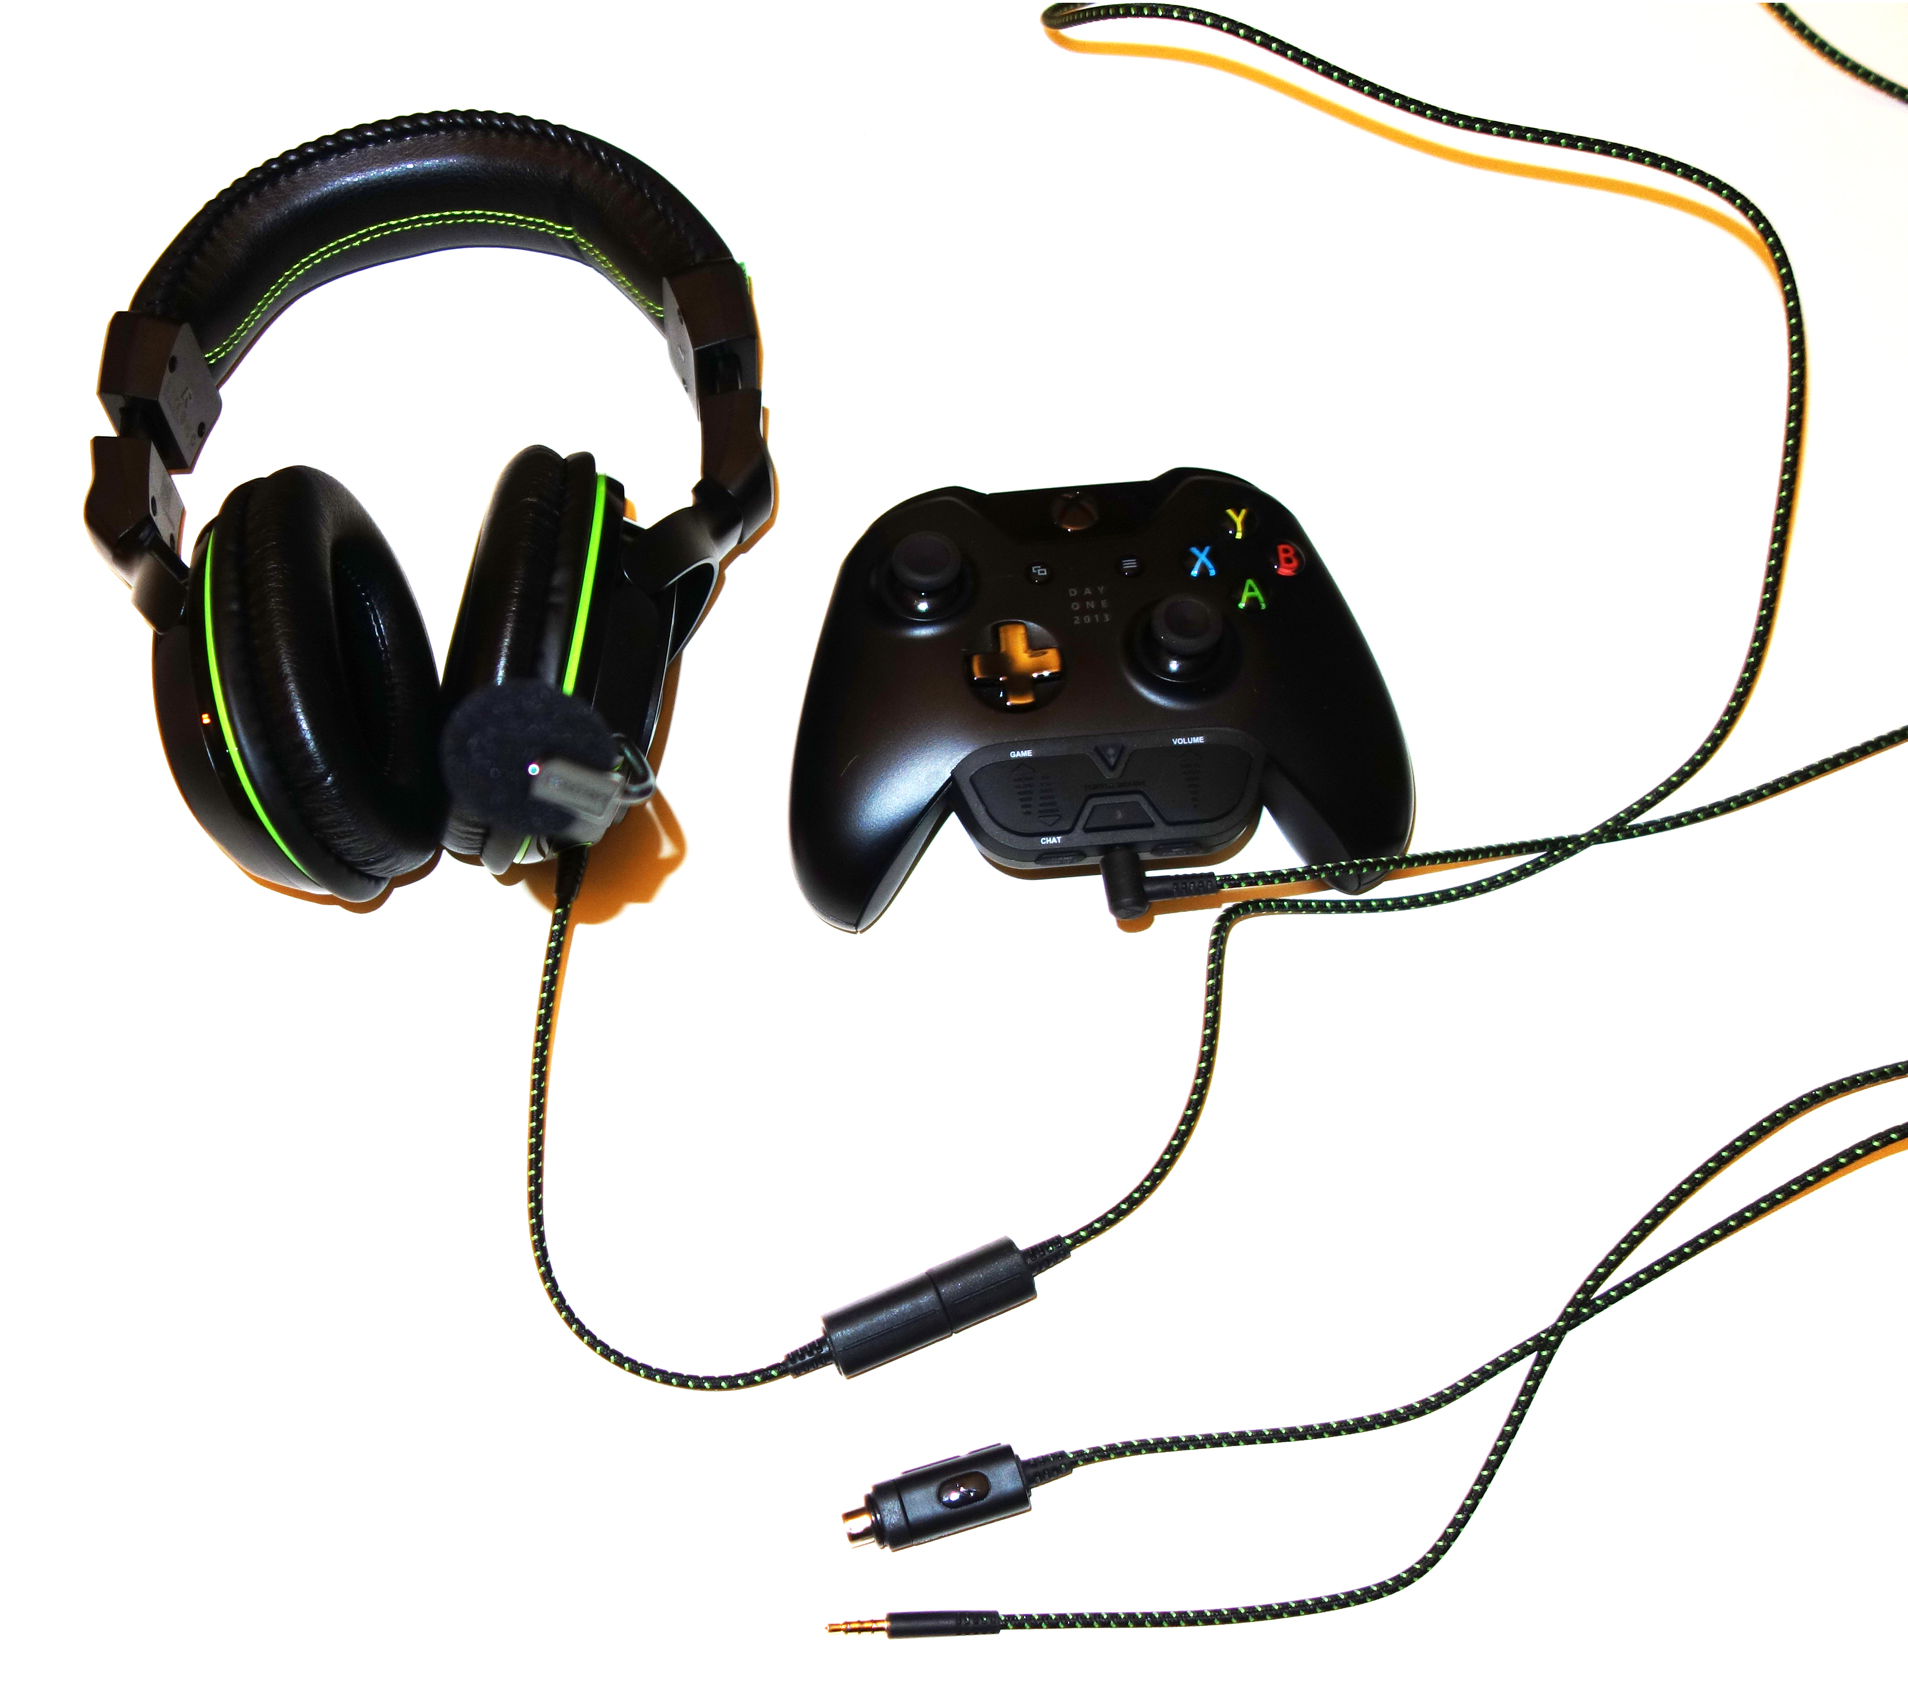 Ear Force XO SEVEN Pro & Ear Force Headset Audio Controller Plus, Mobile cable, Xbox One controller